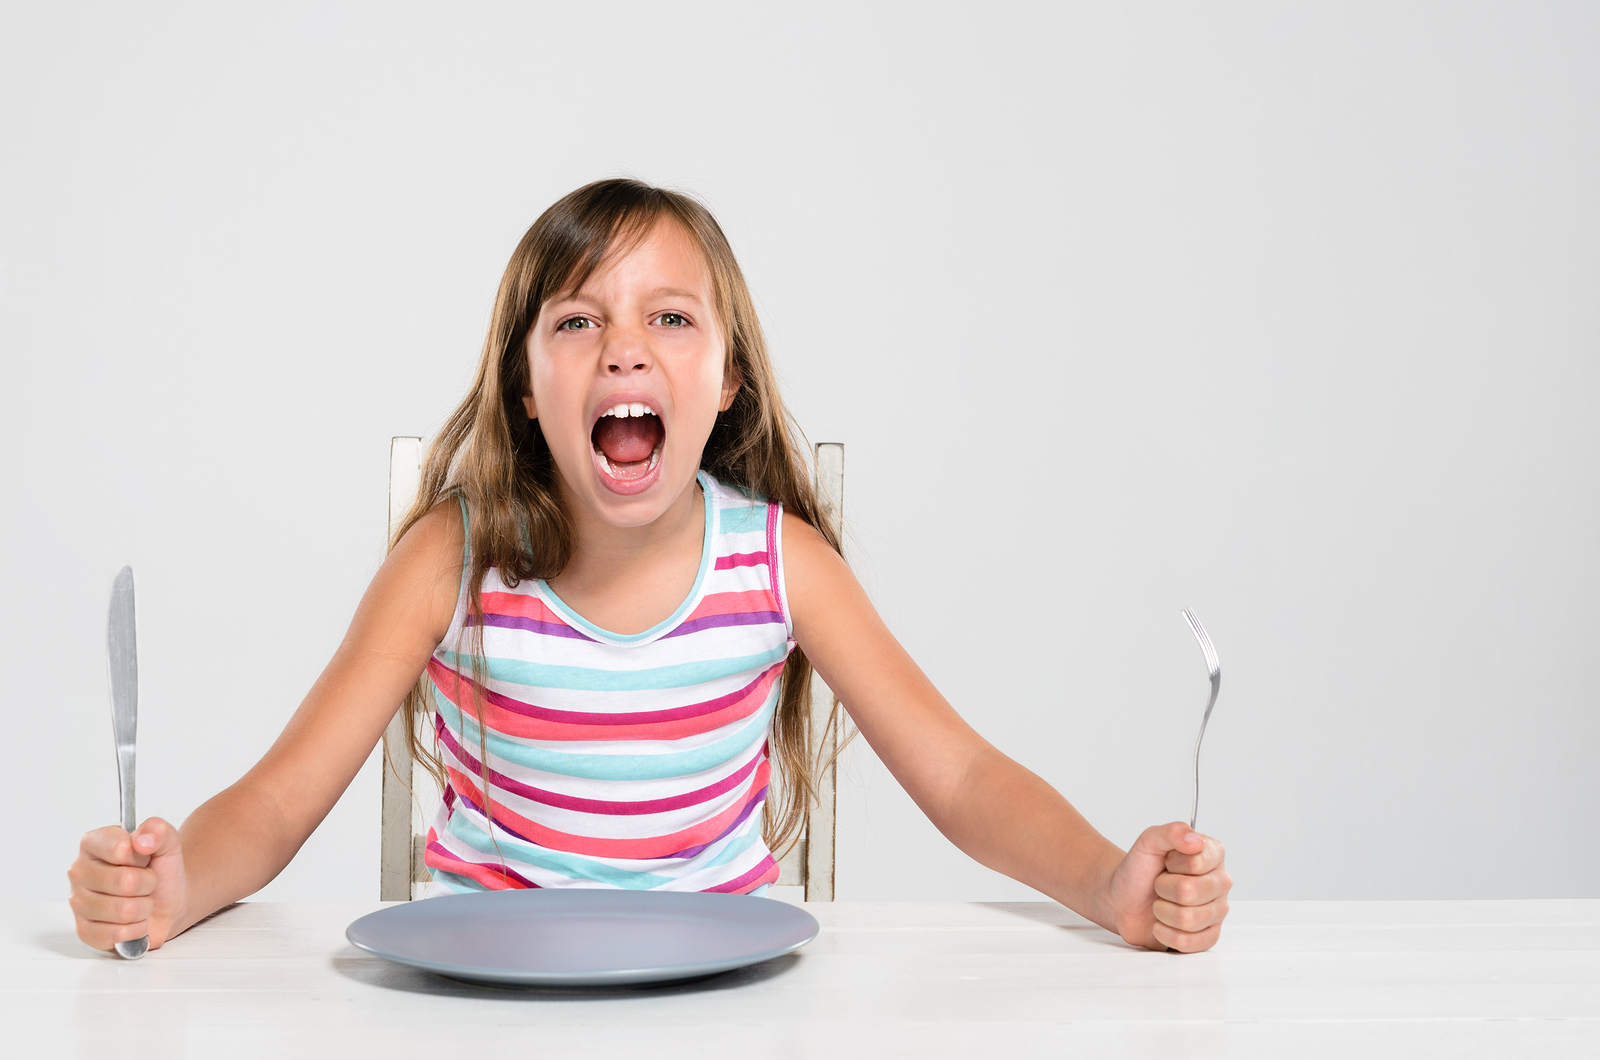 bigstock Hungry angry young girl scream 103587893 | Stay at Home Mum.com.au